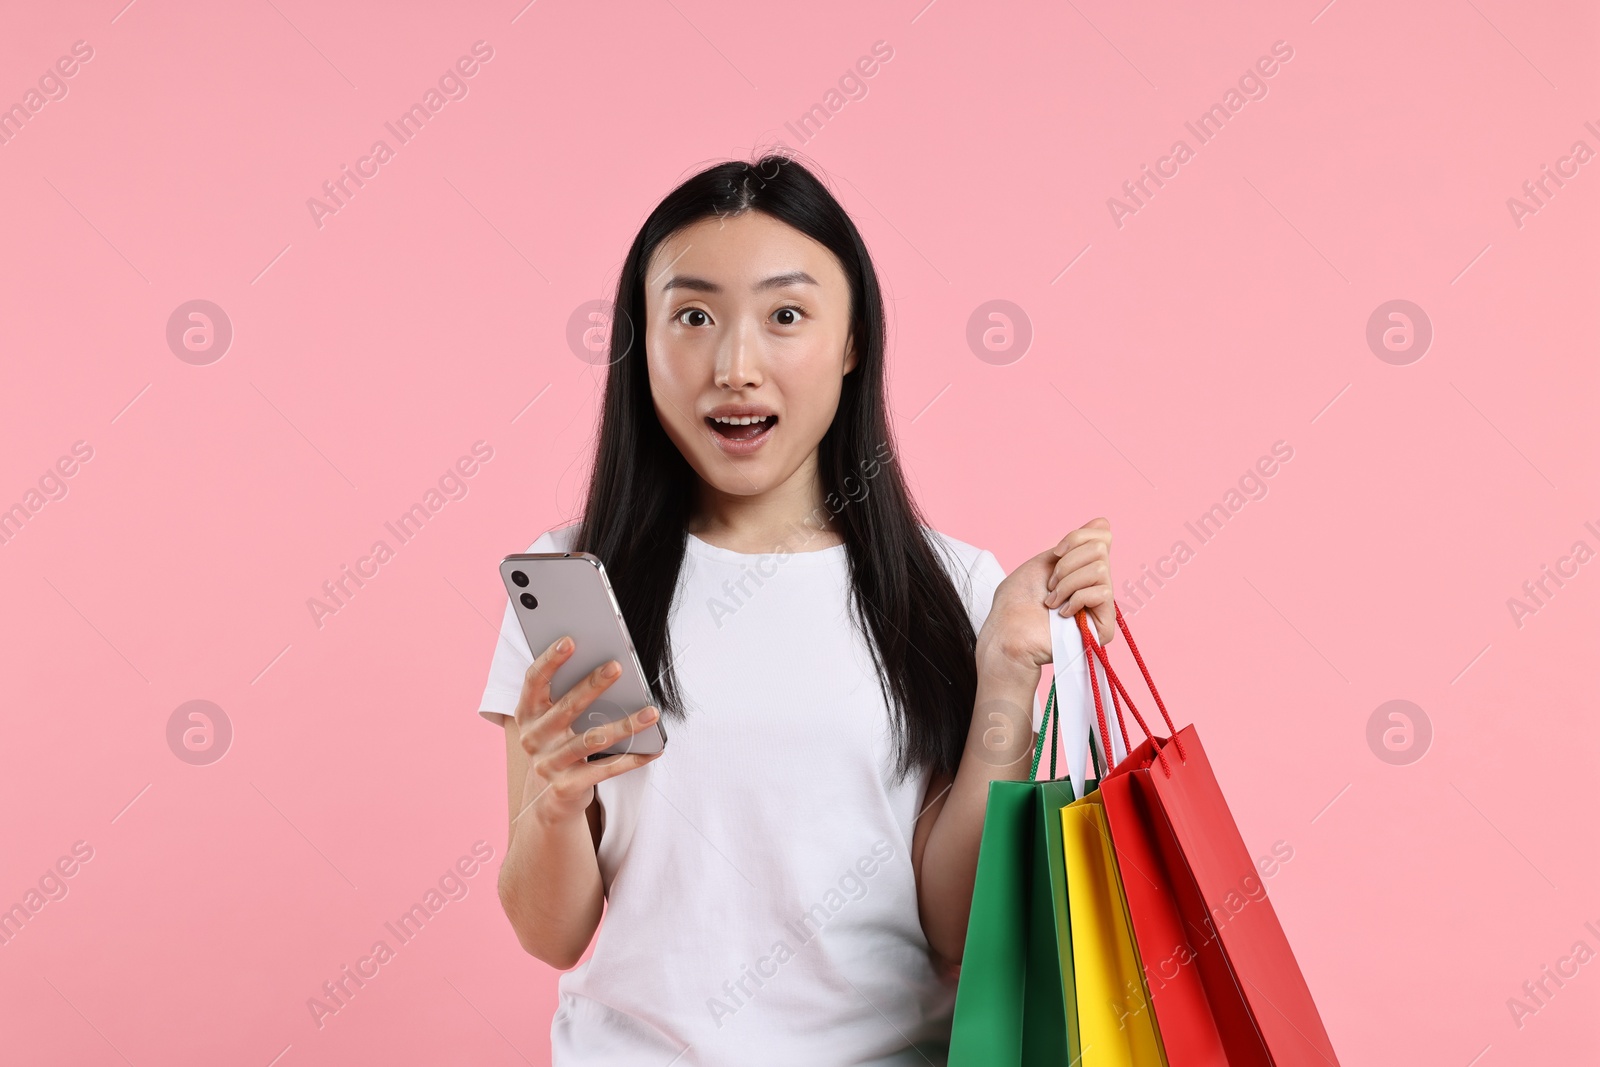 Photo of Surprised woman with shopping bags on pink background